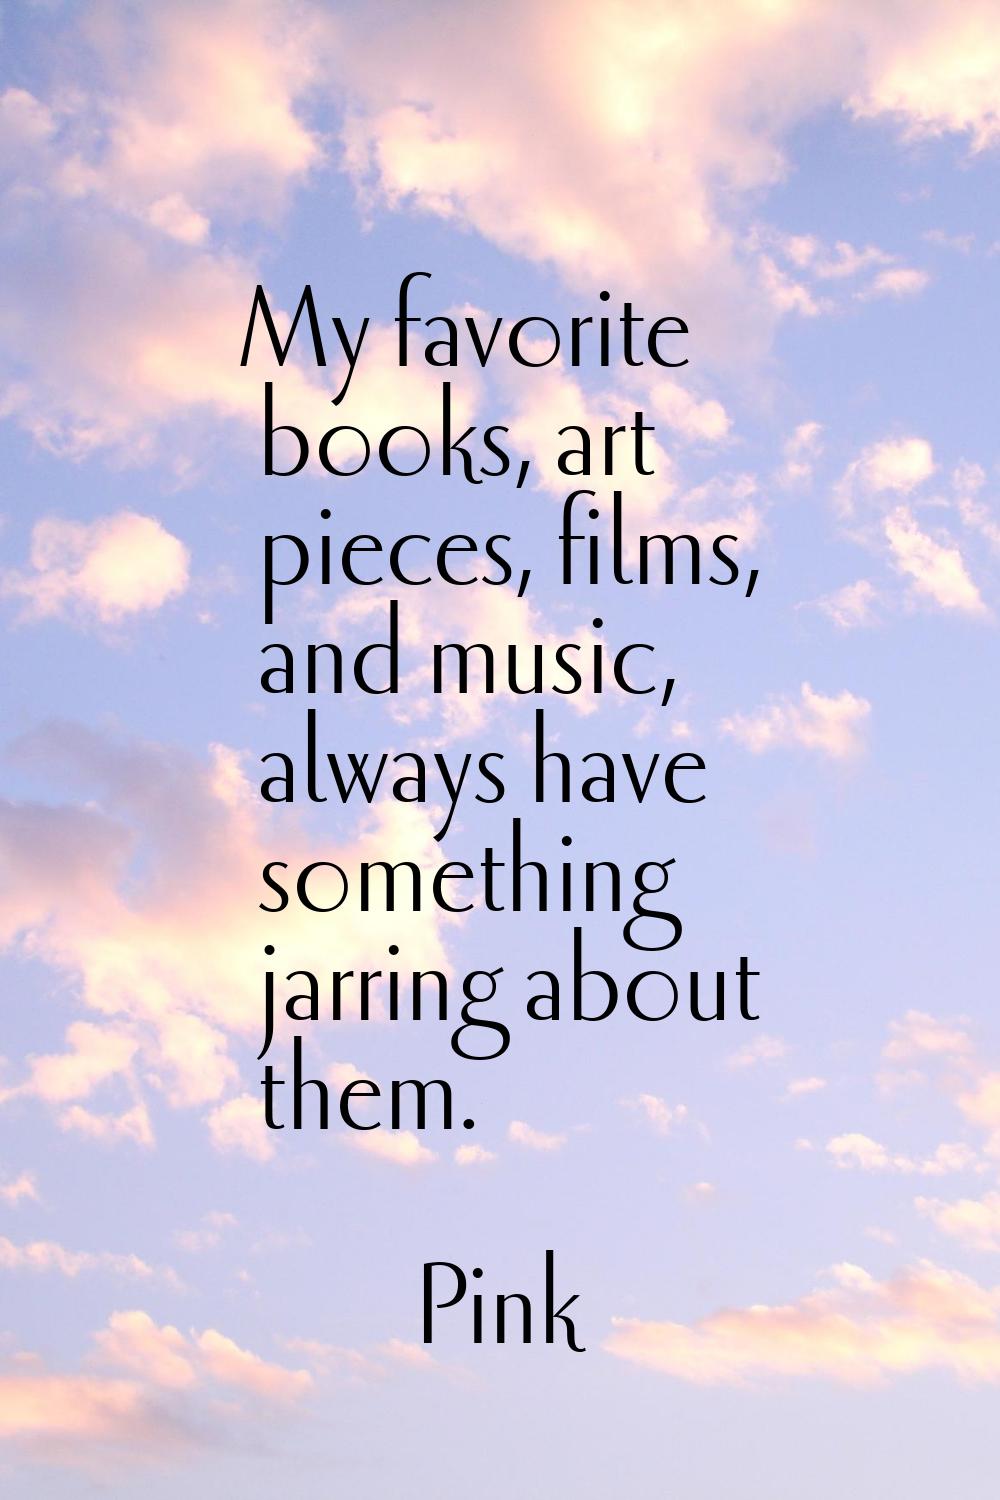 My favorite books, art pieces, films, and music, always have something jarring about them.